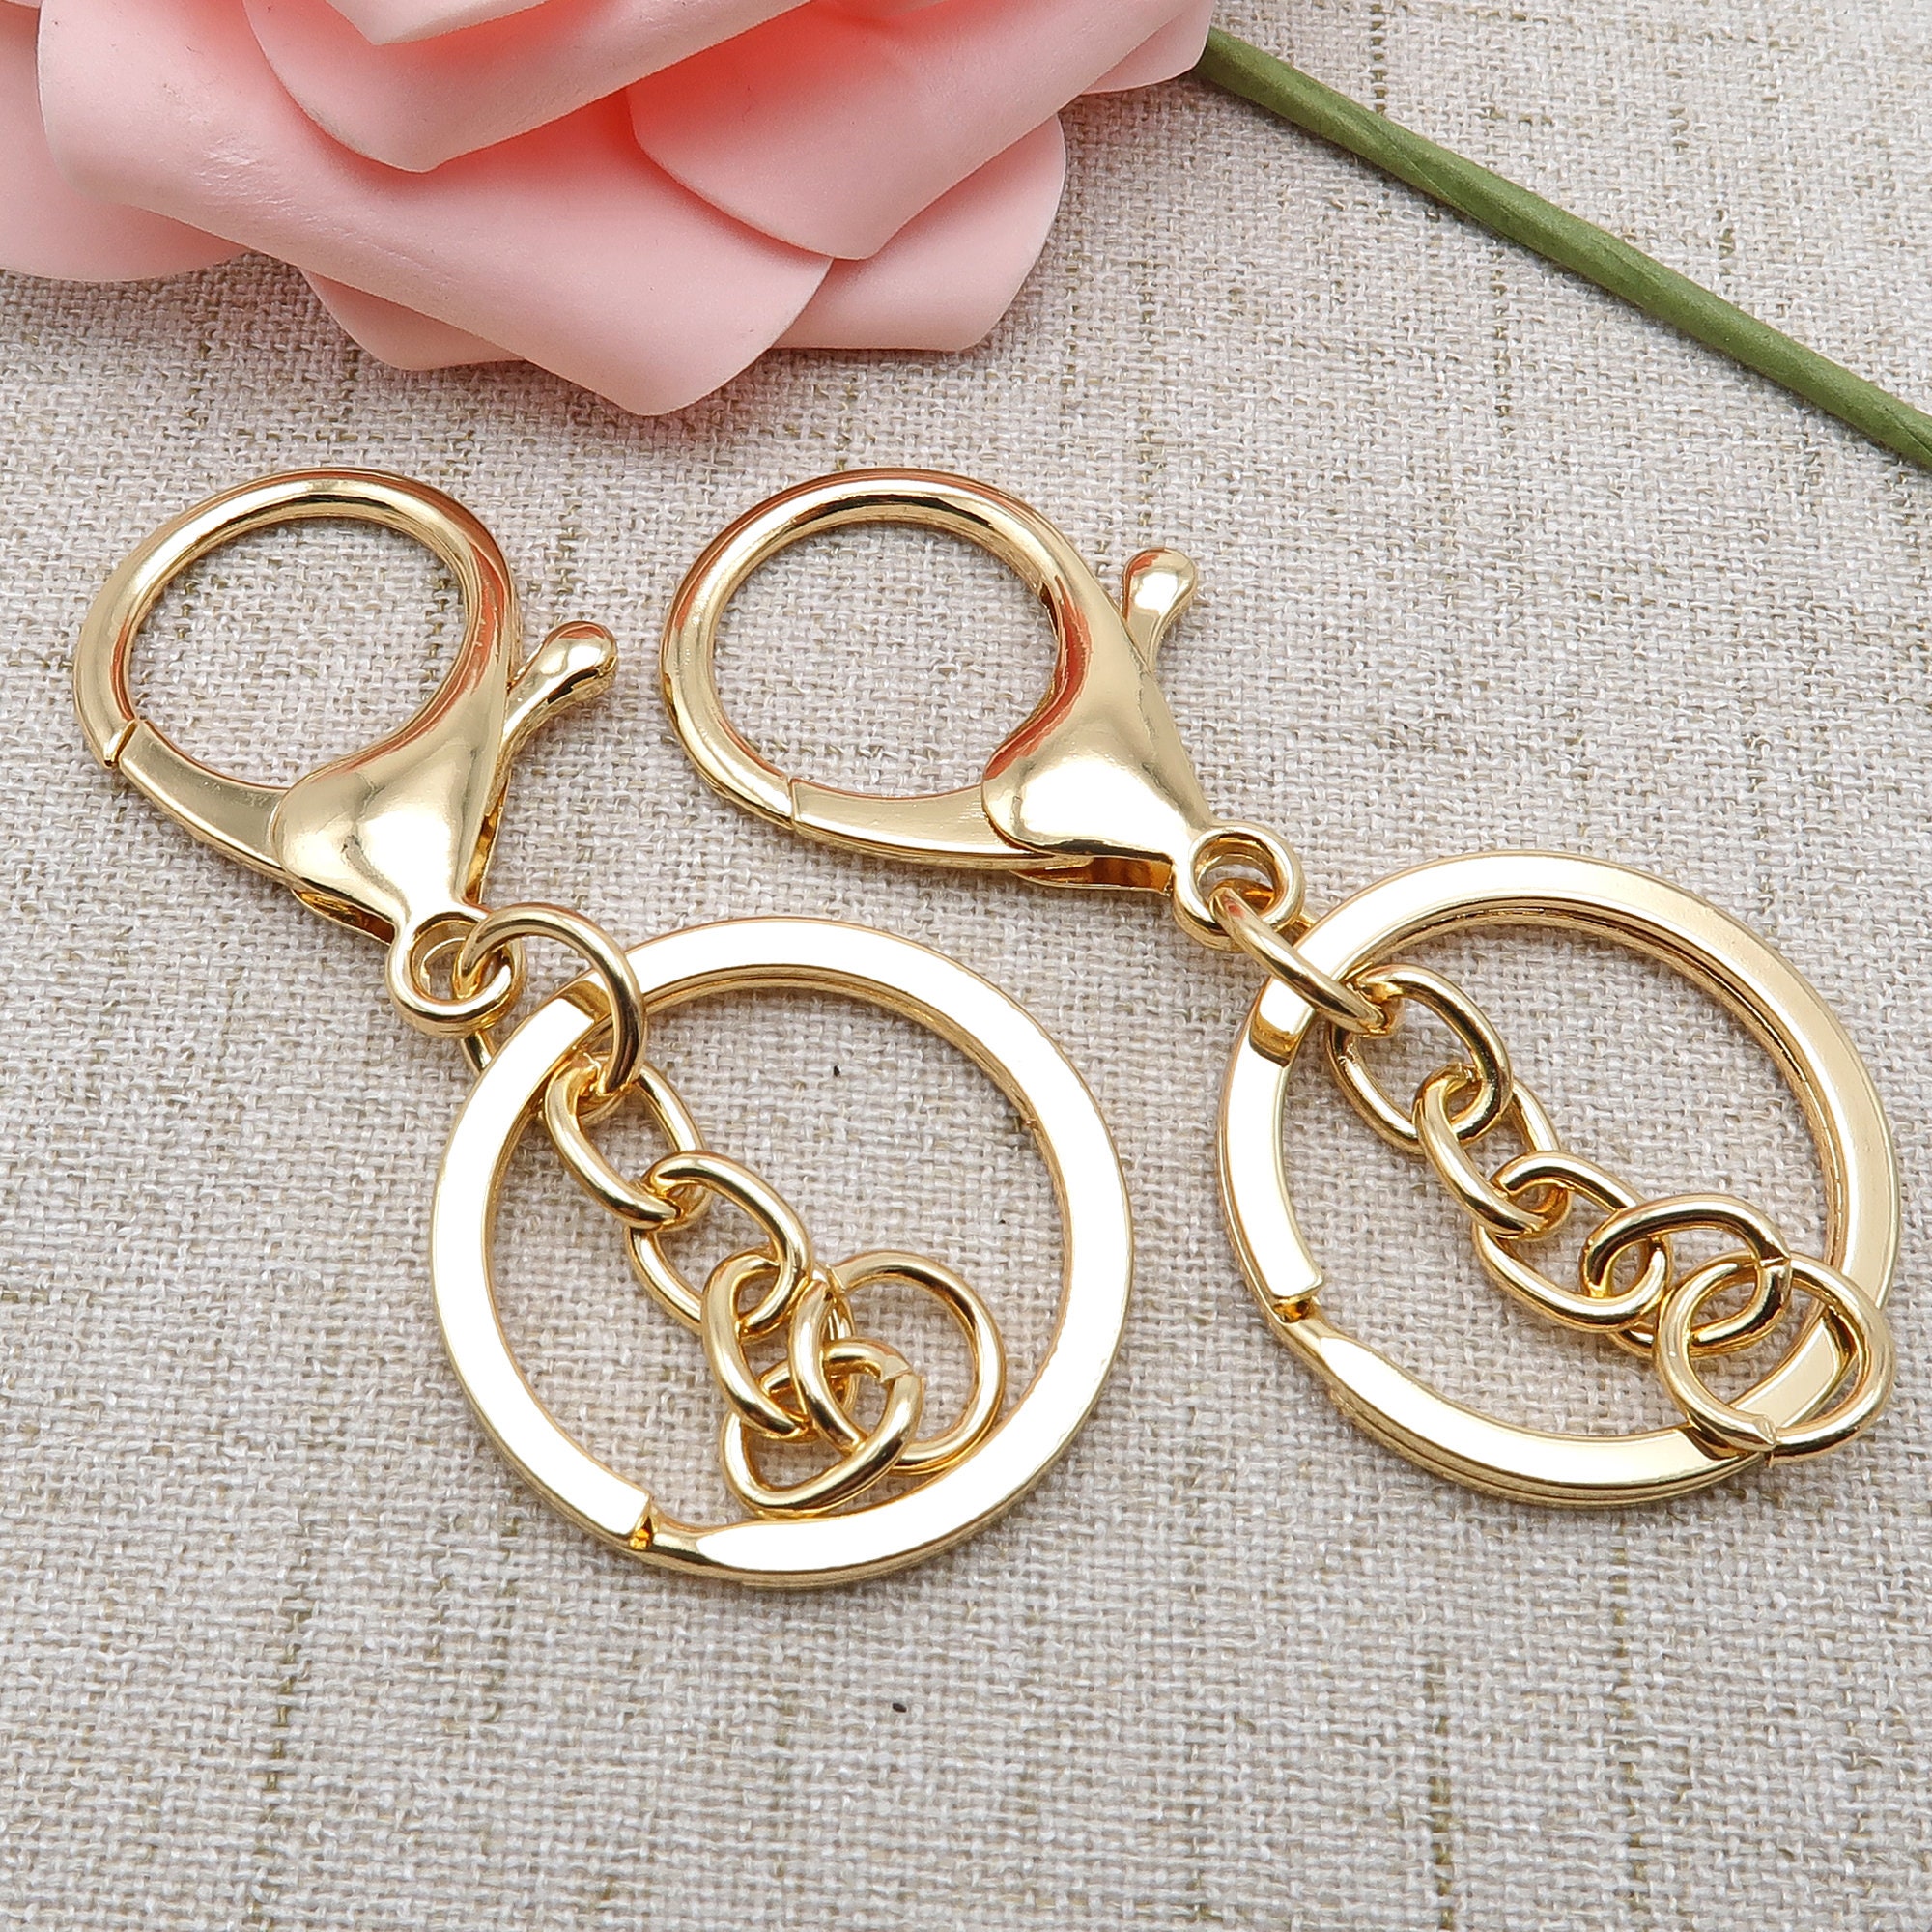 30mm Split Key Ring Clips In Bronze And Rhodium Gold For DIY Metal Keychain  Making With Lobster Clasp From Likegrace, $2.71